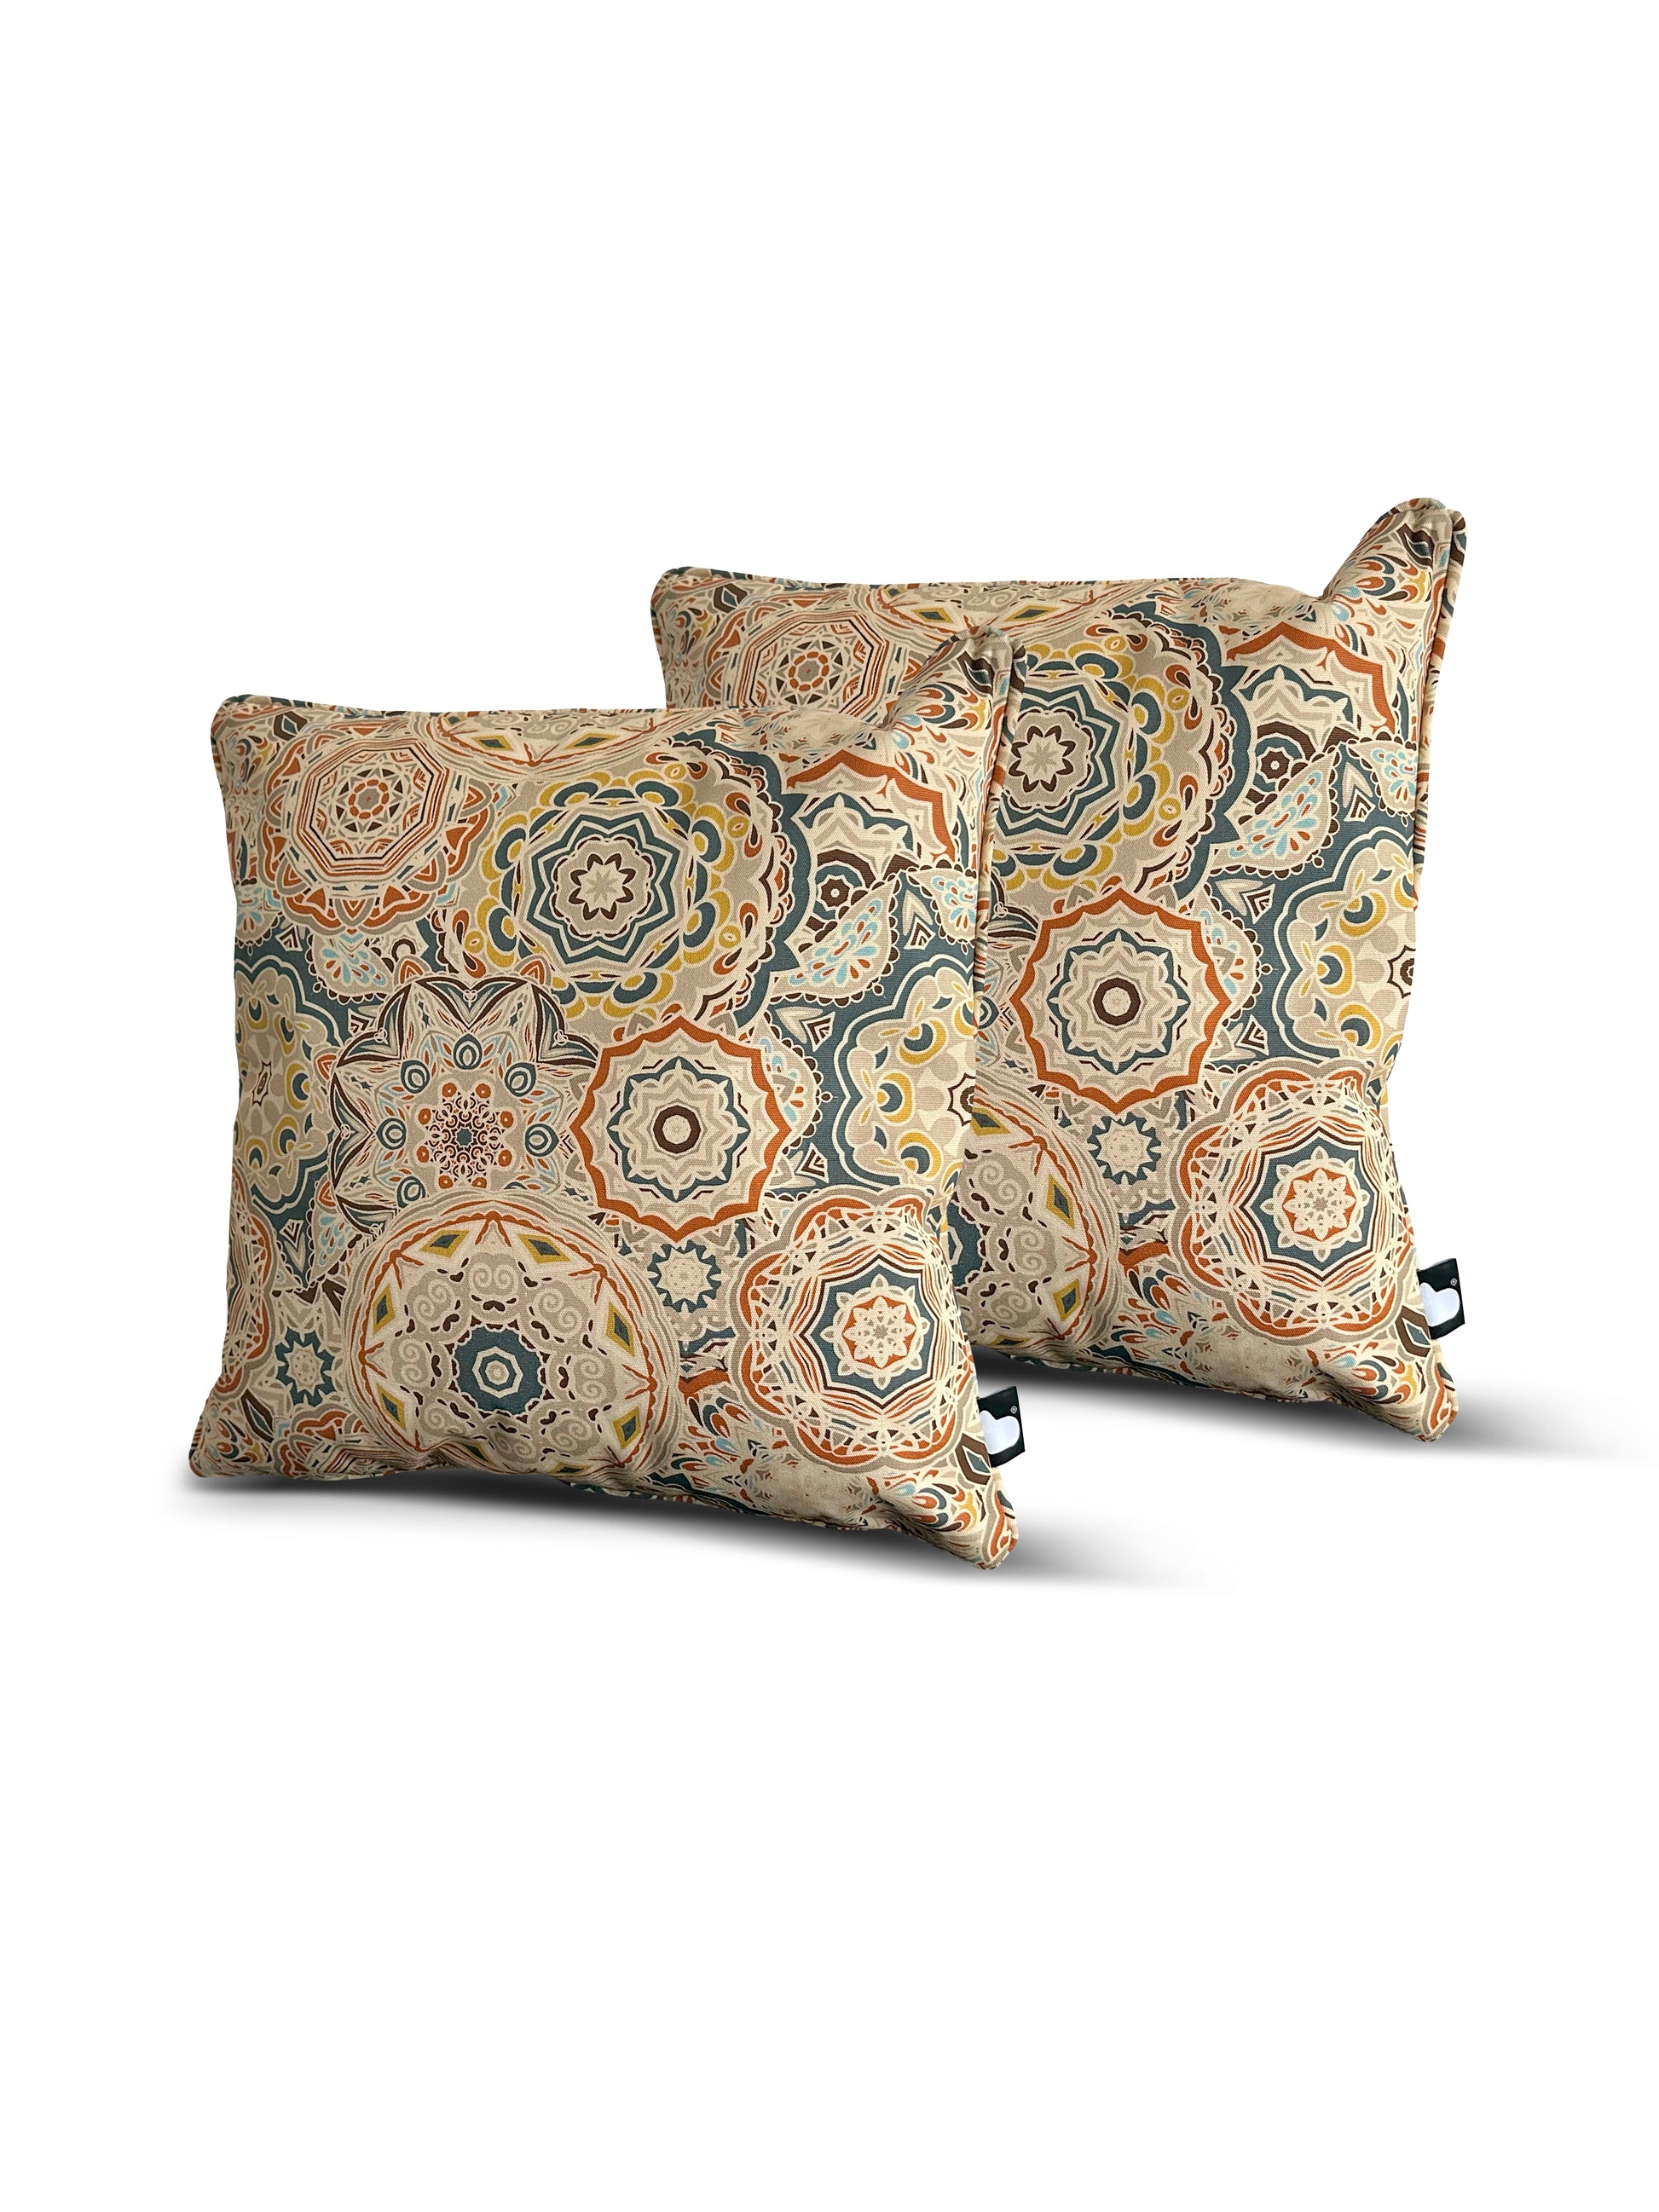 Two Brisks B Cushion Twin Pack Art Collection decorative throw pillows featuring a colorful, intricate pattern of circular, vintage-inspired designs in shades of orange, blue, and beige. Made with splash-proof fabric, the pillows are positioned against a plain white background.